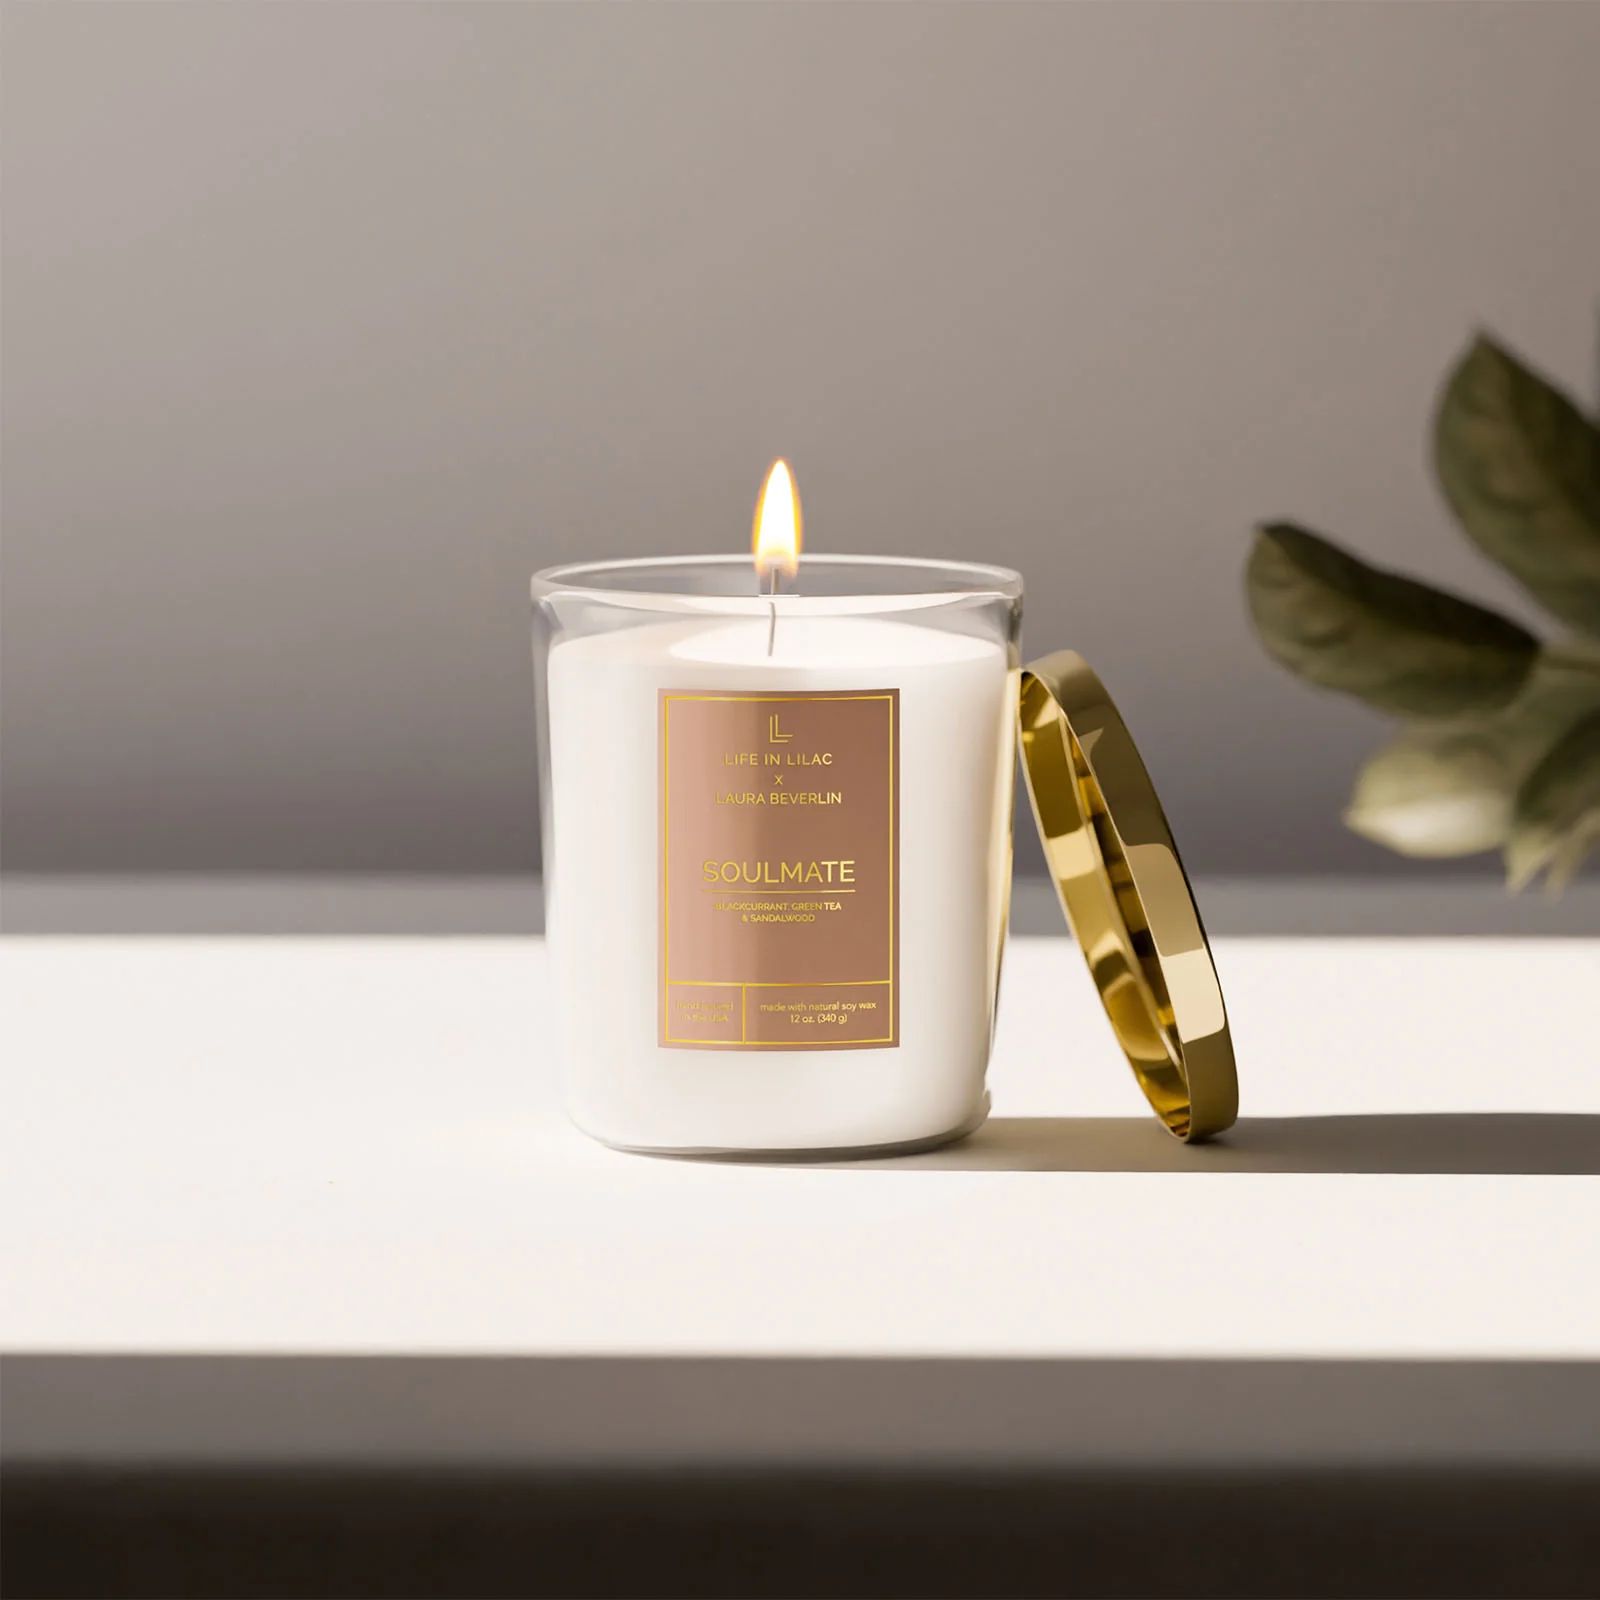 Laura Beverlin Soulmate Candle | Life In Lilac